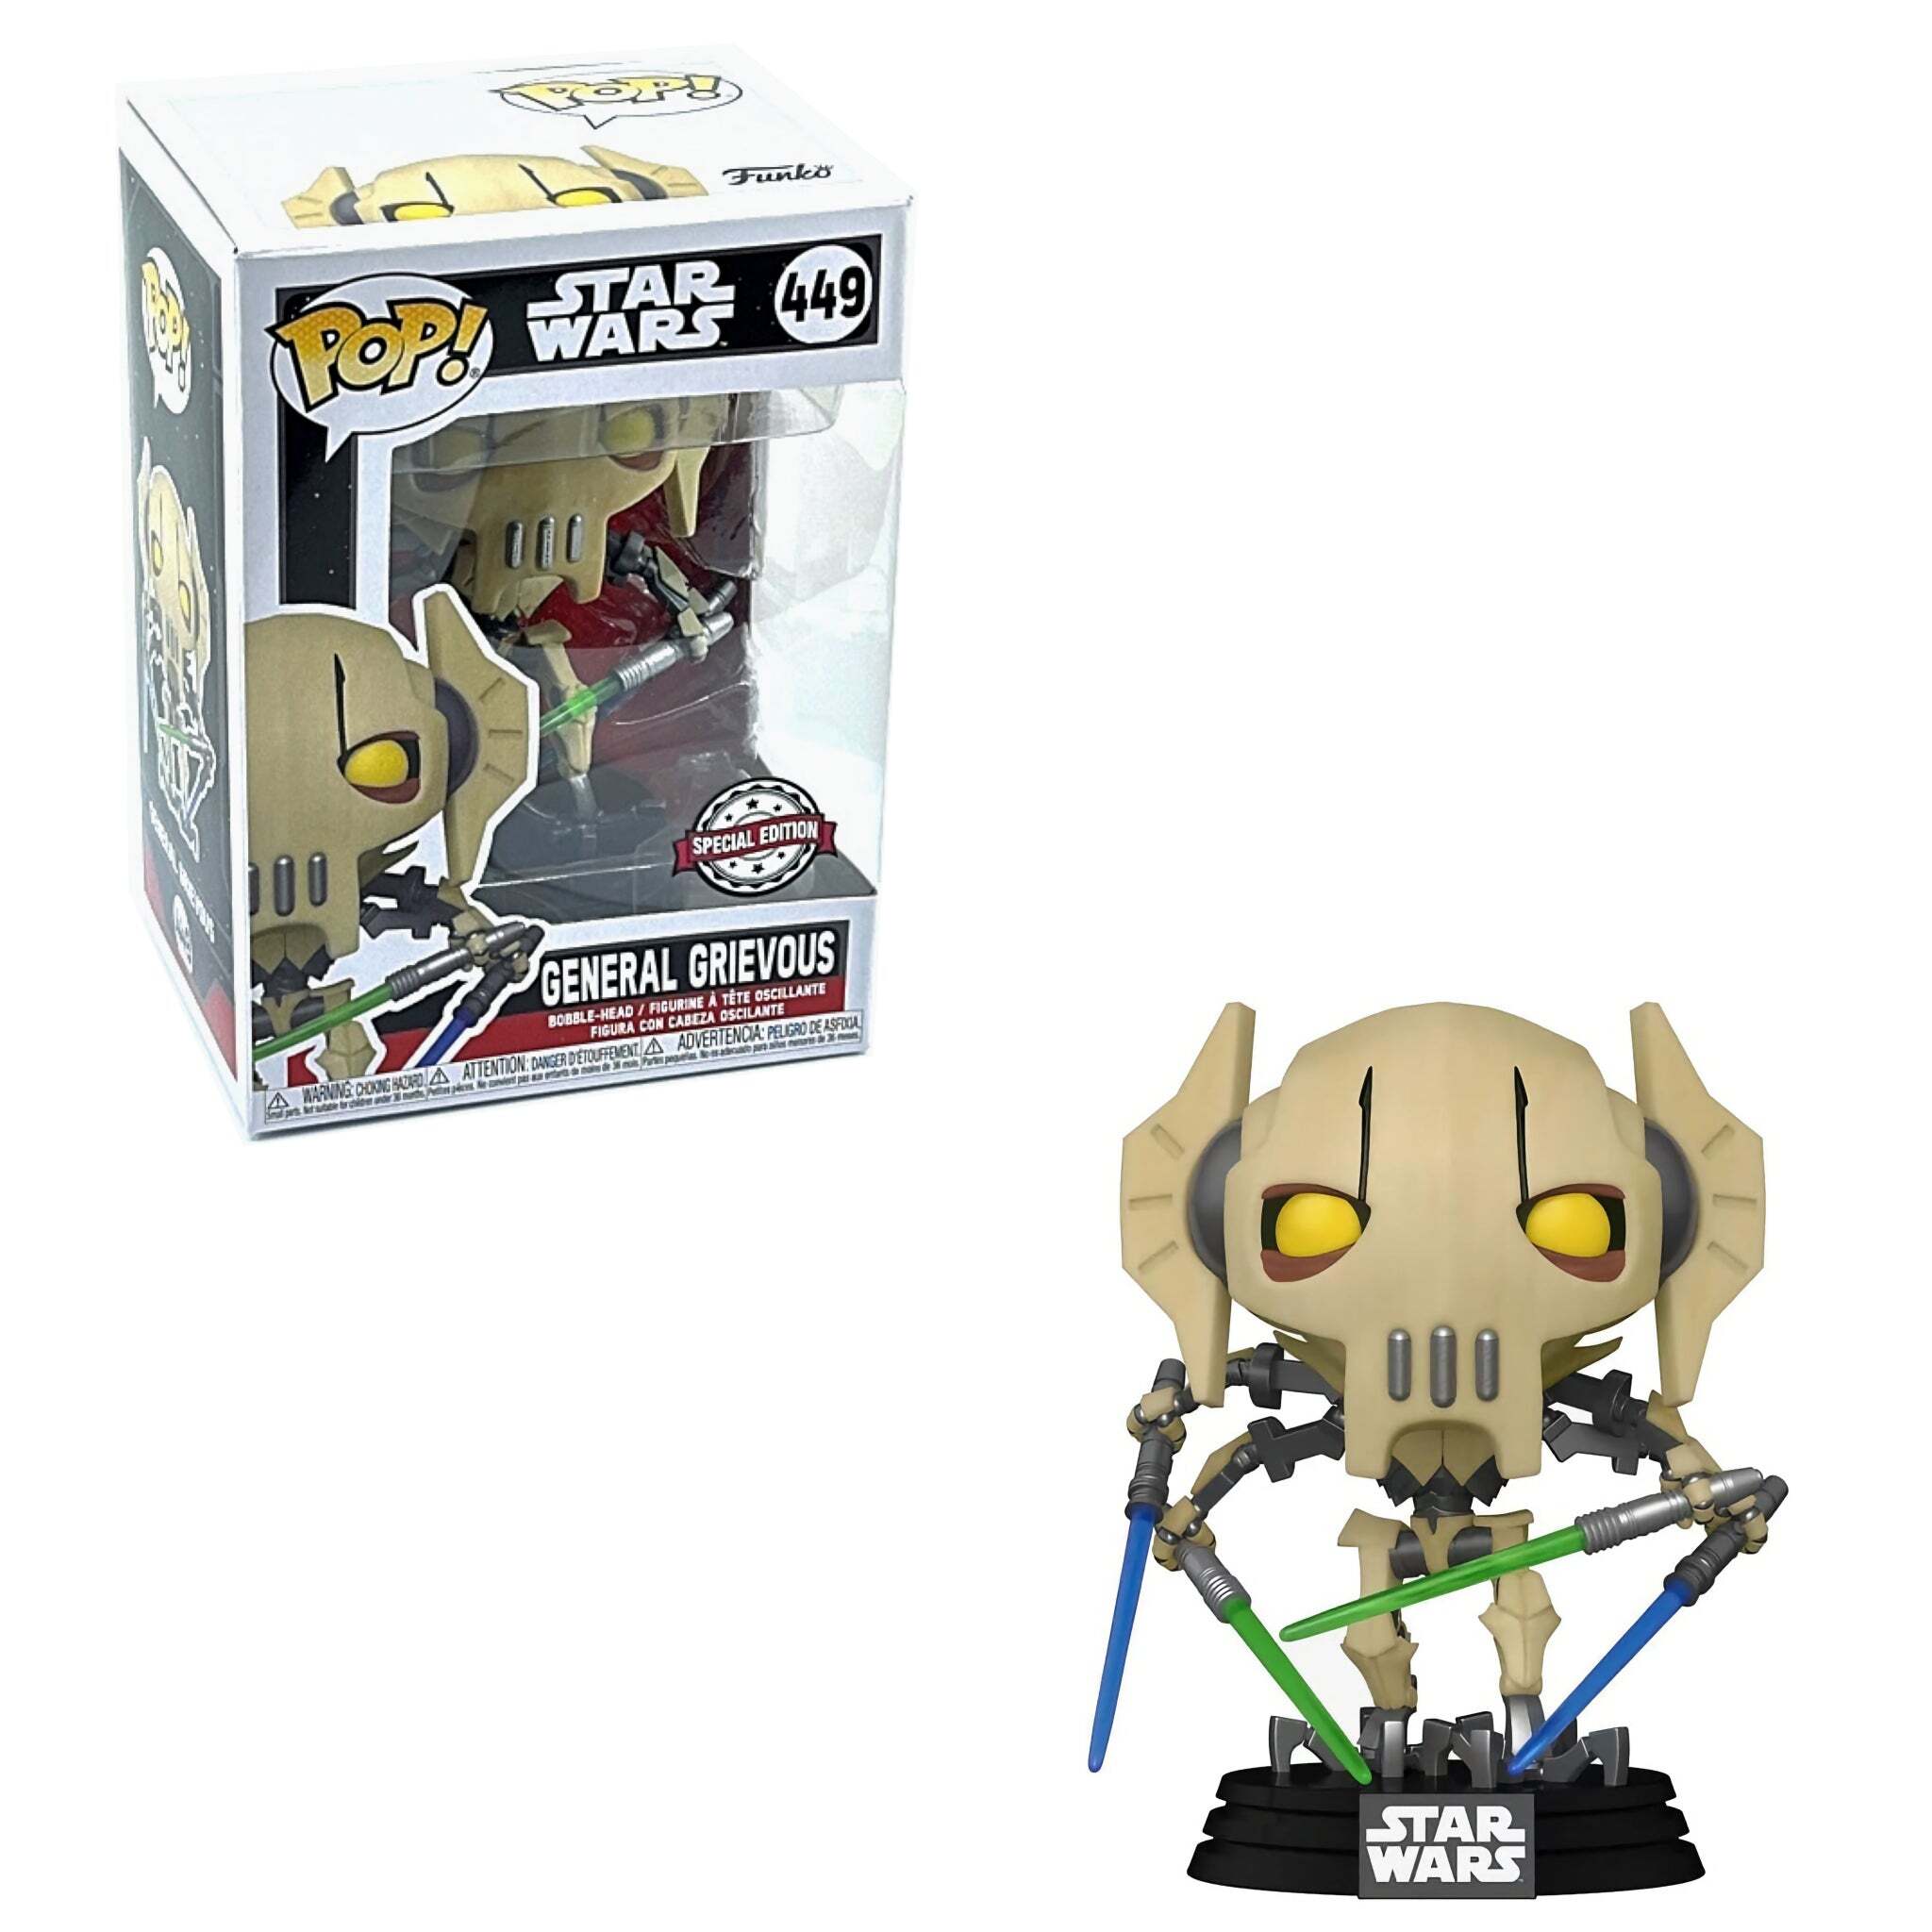 General Grievous (4 Lightsabers) Funko Pop! SPECIAL EDITION